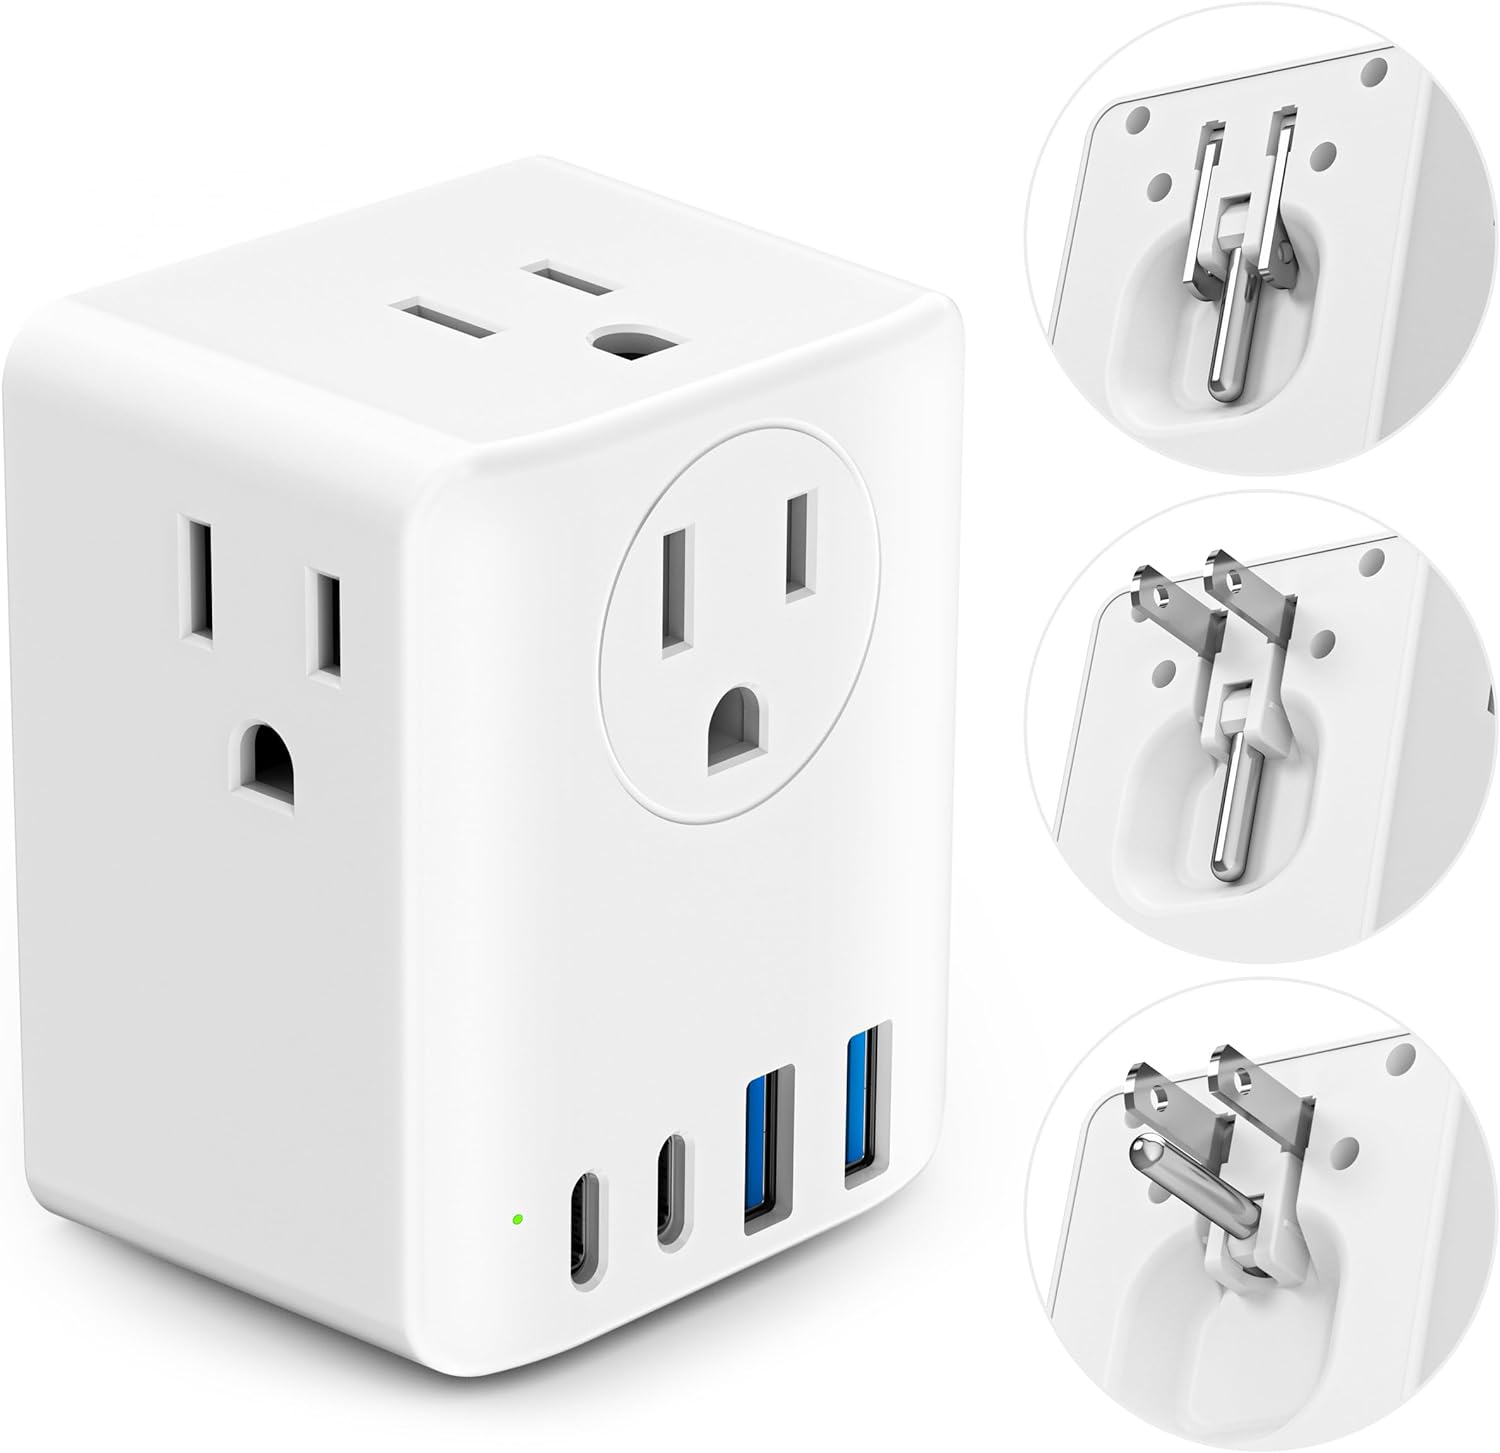 Cruise Approved Power Strip, Foldable Plug Outlet Extender with 4 Outlets 4 USB Ports(2 USB C), Non Surge Protector for Cruise Ship Travel Essentials